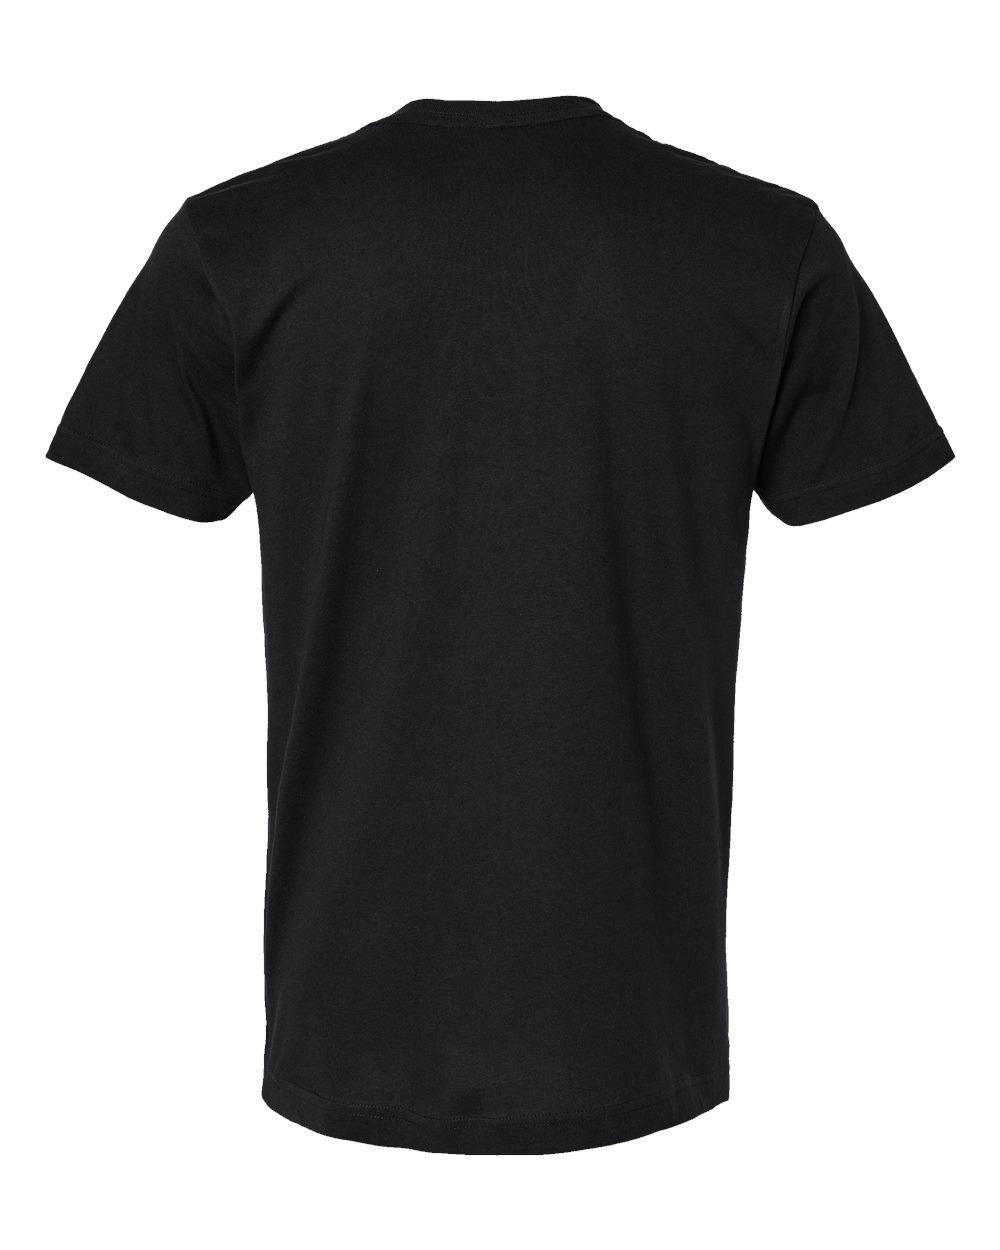 LAT Mens Adult Fine Jersey Tee T Shirt Blank Plain Solid 6901 up to 3XL ...